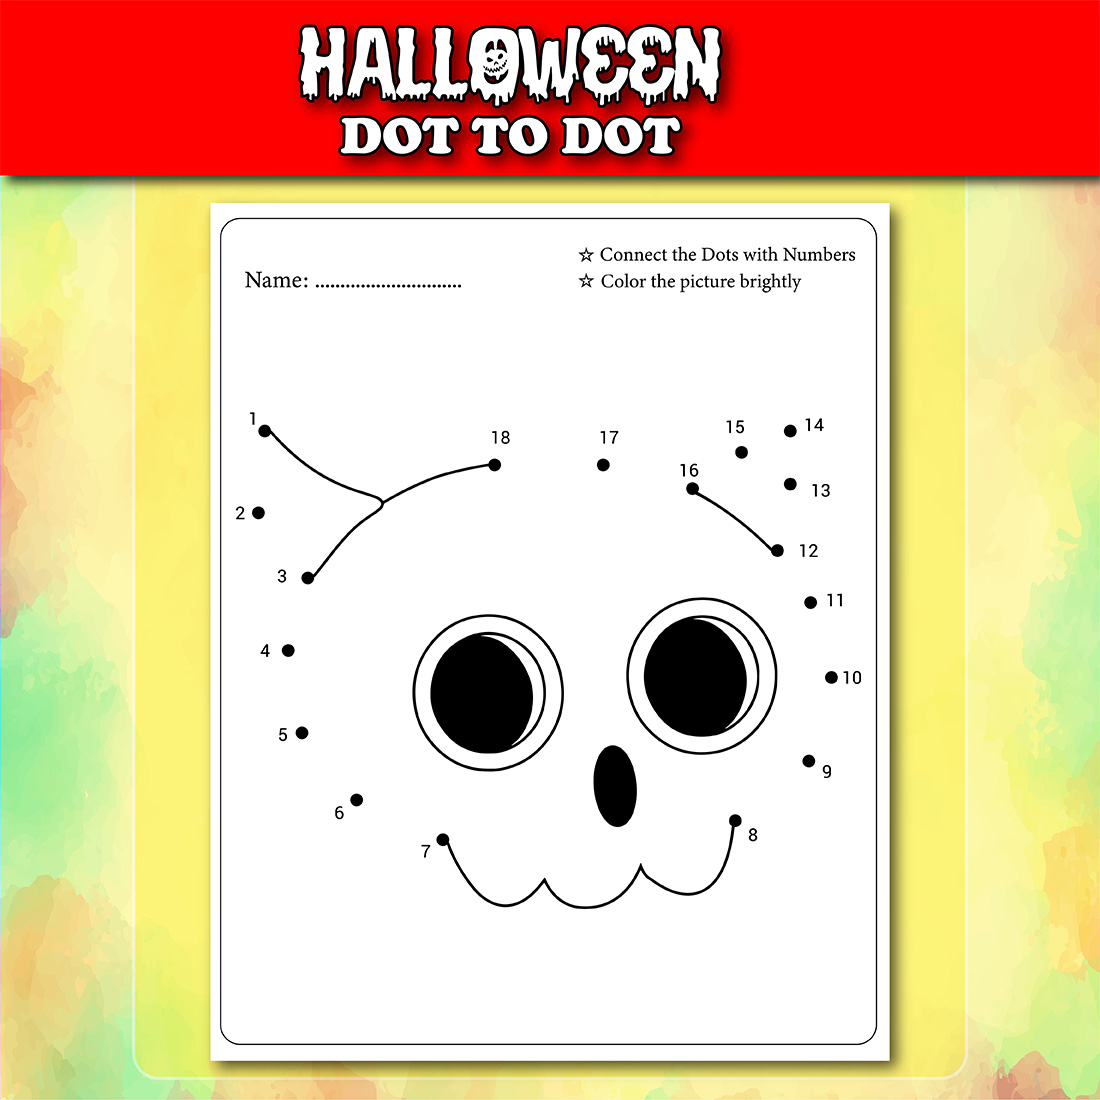 Halloween Dot To Dot For Kids Vol - 4, funny face page.